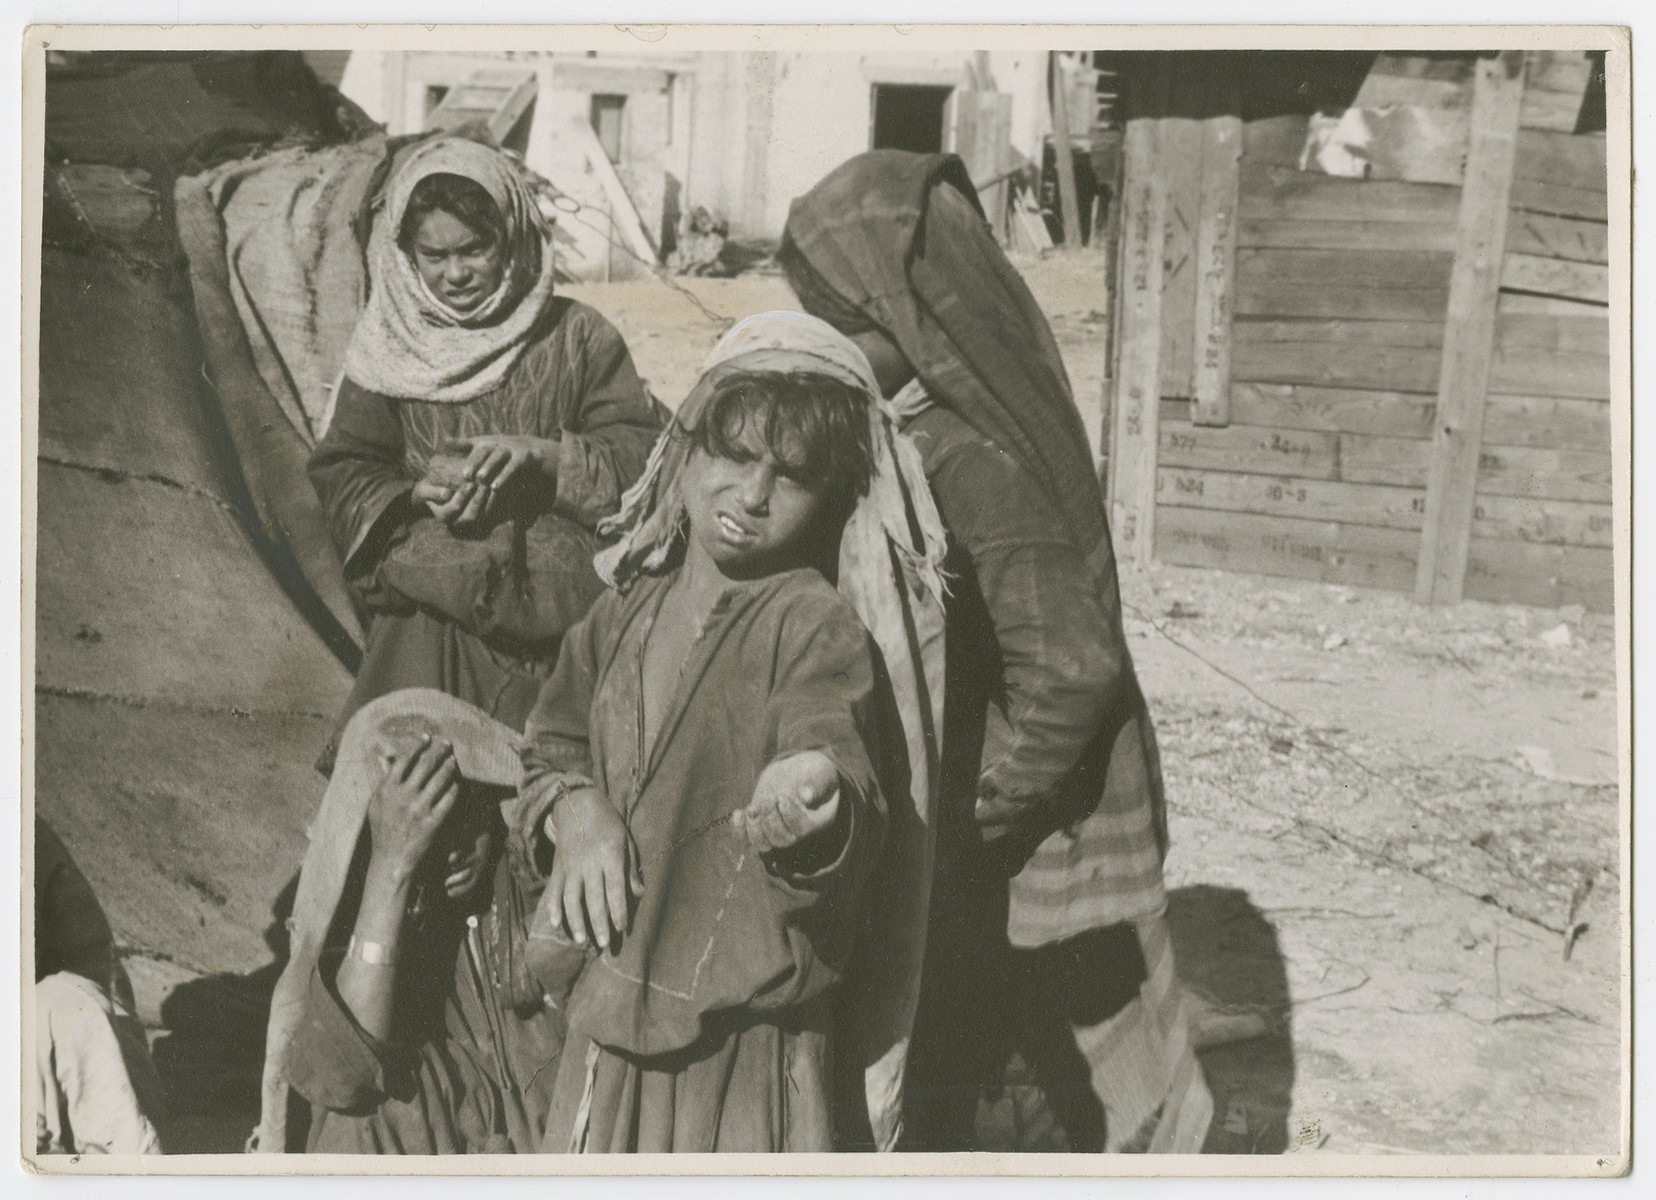 Children [probably Arab] beg in an unidentified location in Palestiine.

Photograph is used on page 244 of Robert Gessner's "Some of My Best Friends are Jews."